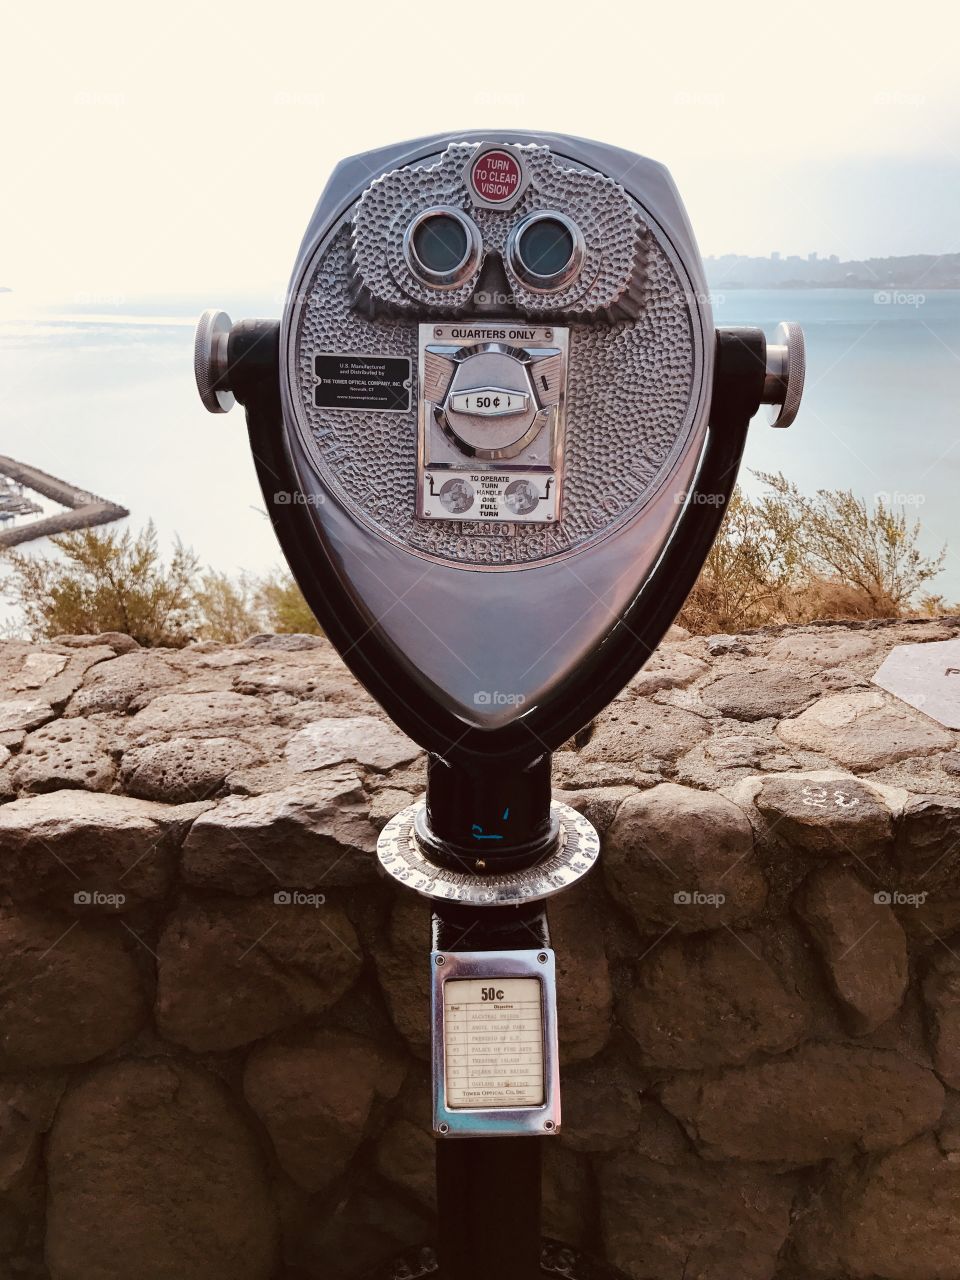 Coin operated tower viewer